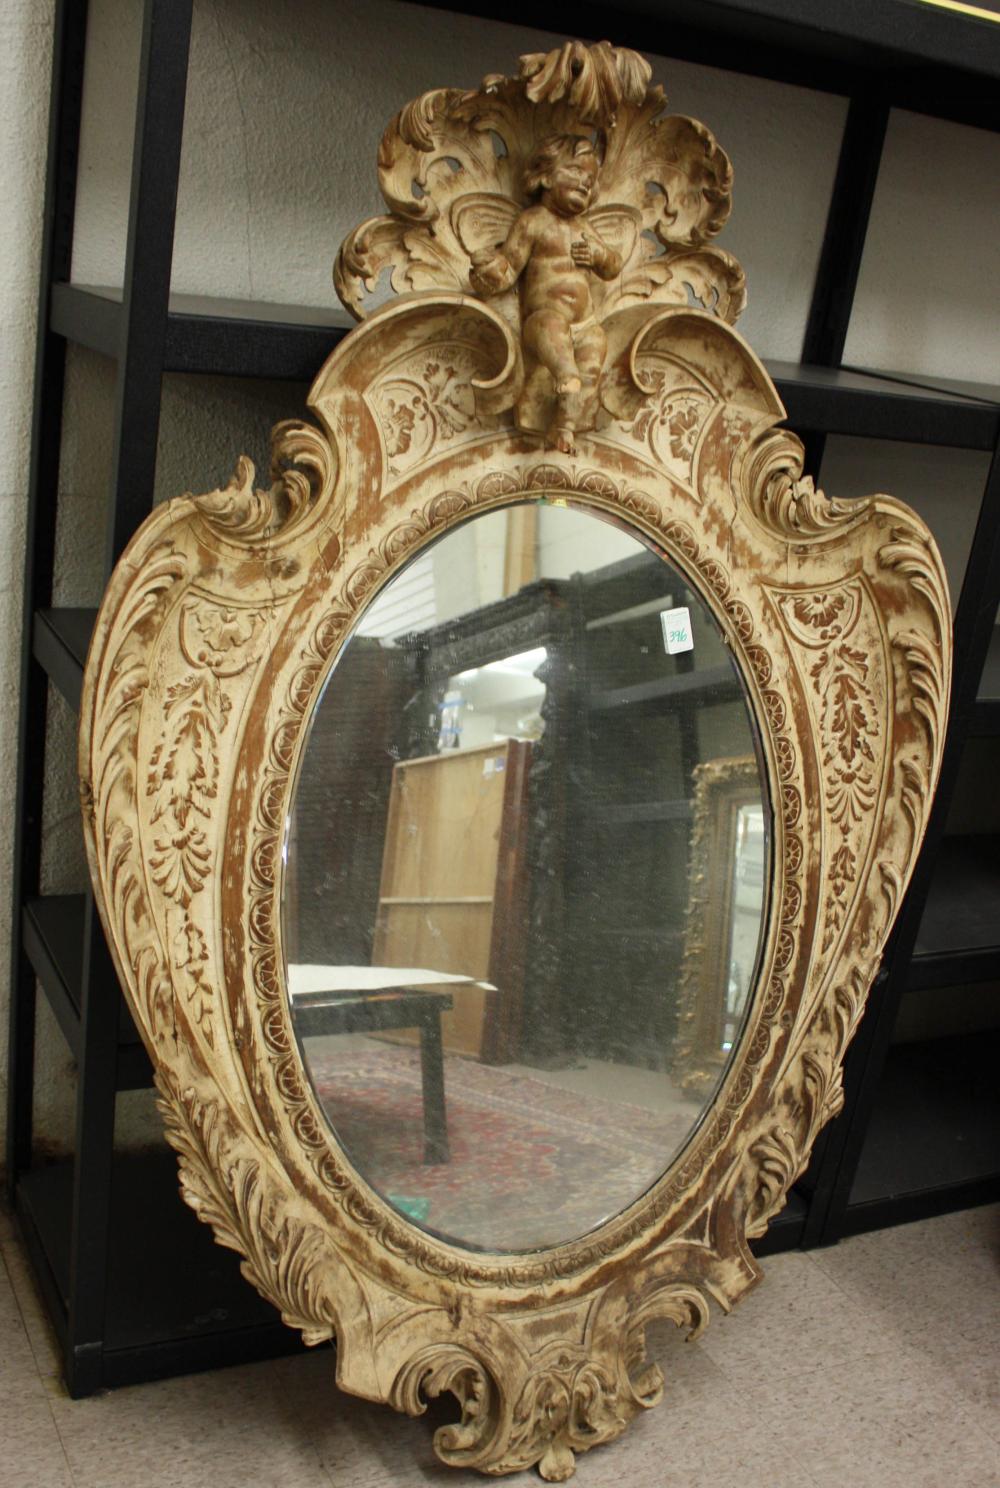 LARGE OVAL WALL MIRRORLARGE OVAL